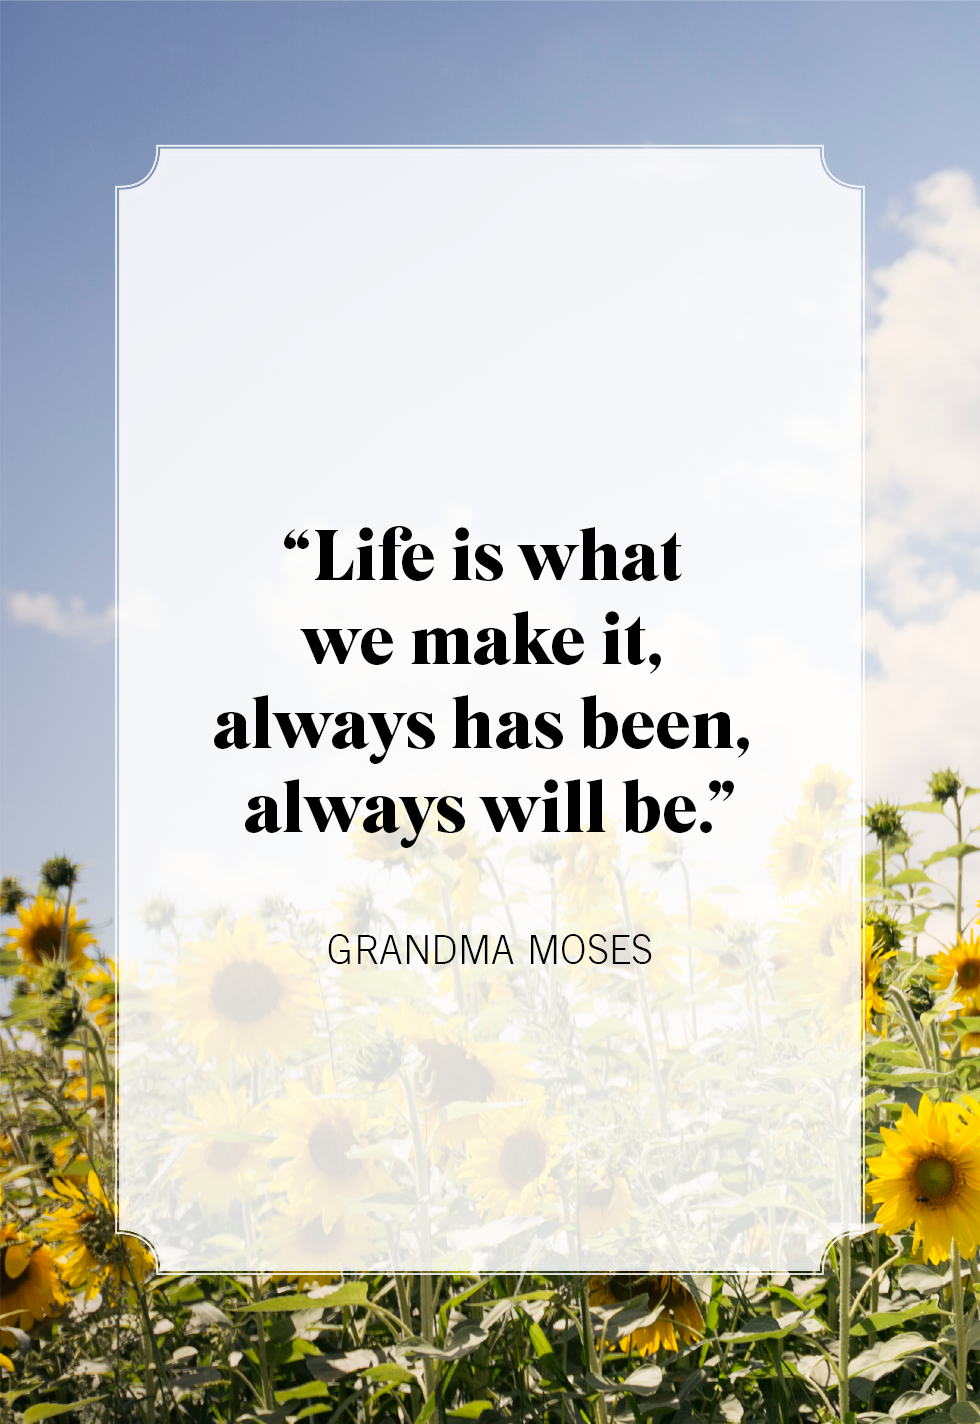 25 Best Life Quotes - Short Quotes About Life